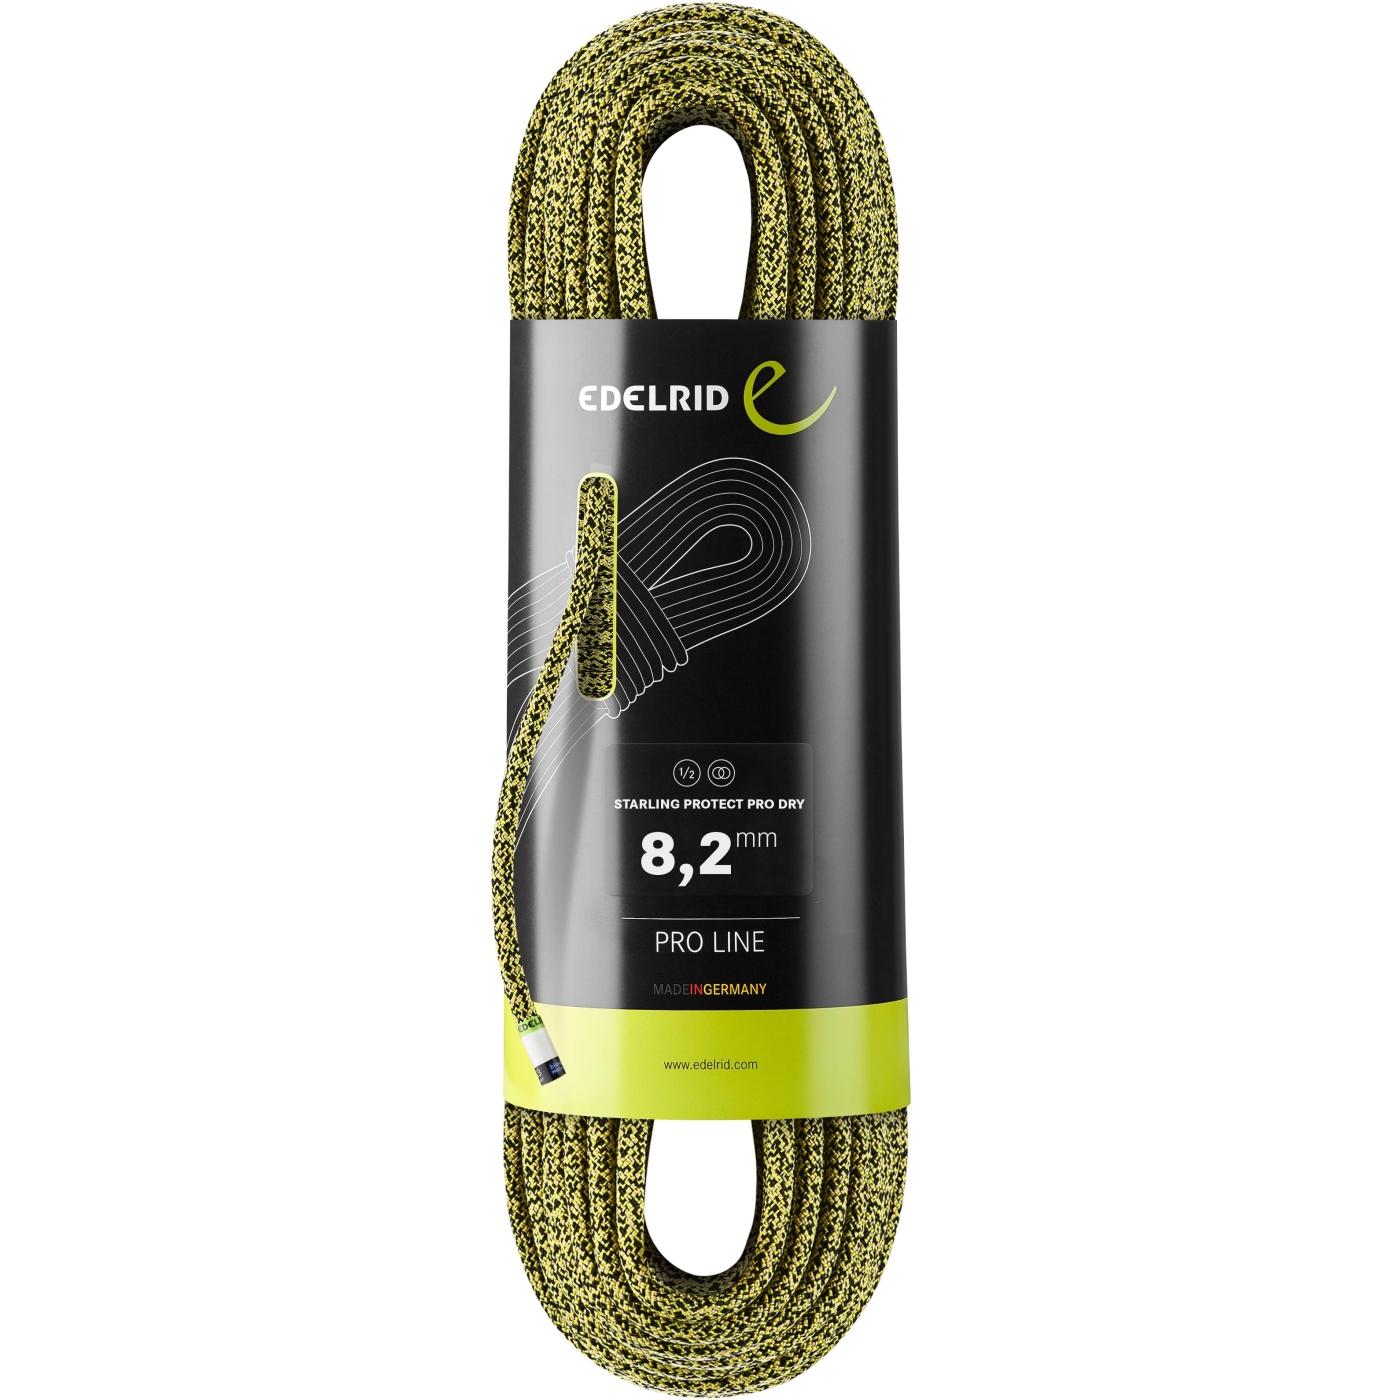 Productfoto van Edelrid Starling Protect Pro Dry 8,2mm Touw - 50m - yellow-night